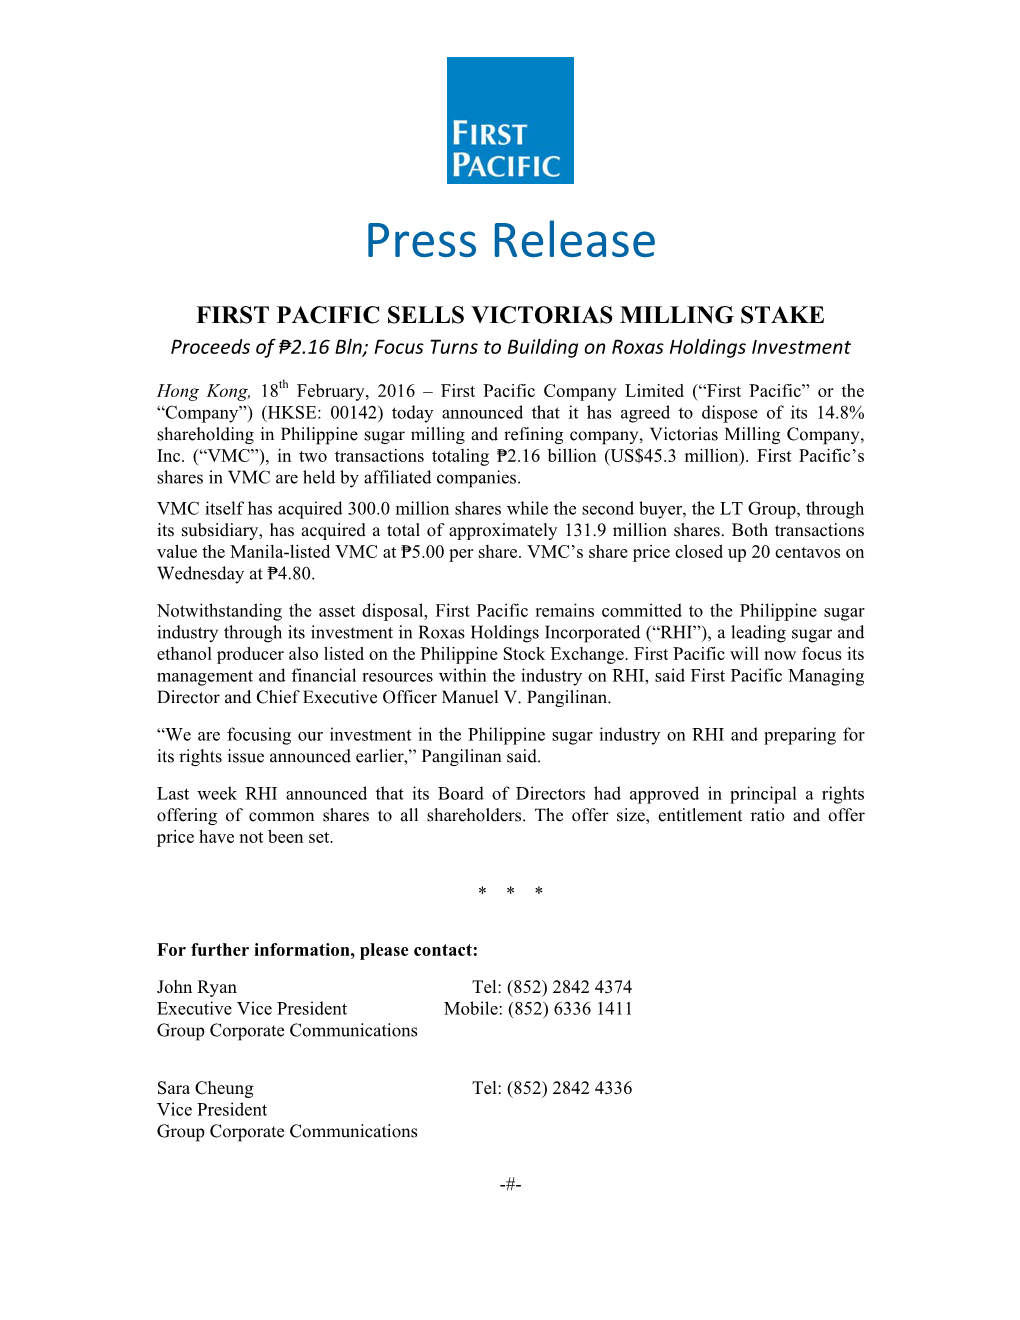 First Pacific Sells Victorias Milling Stake; Proceeds of ₱2.16